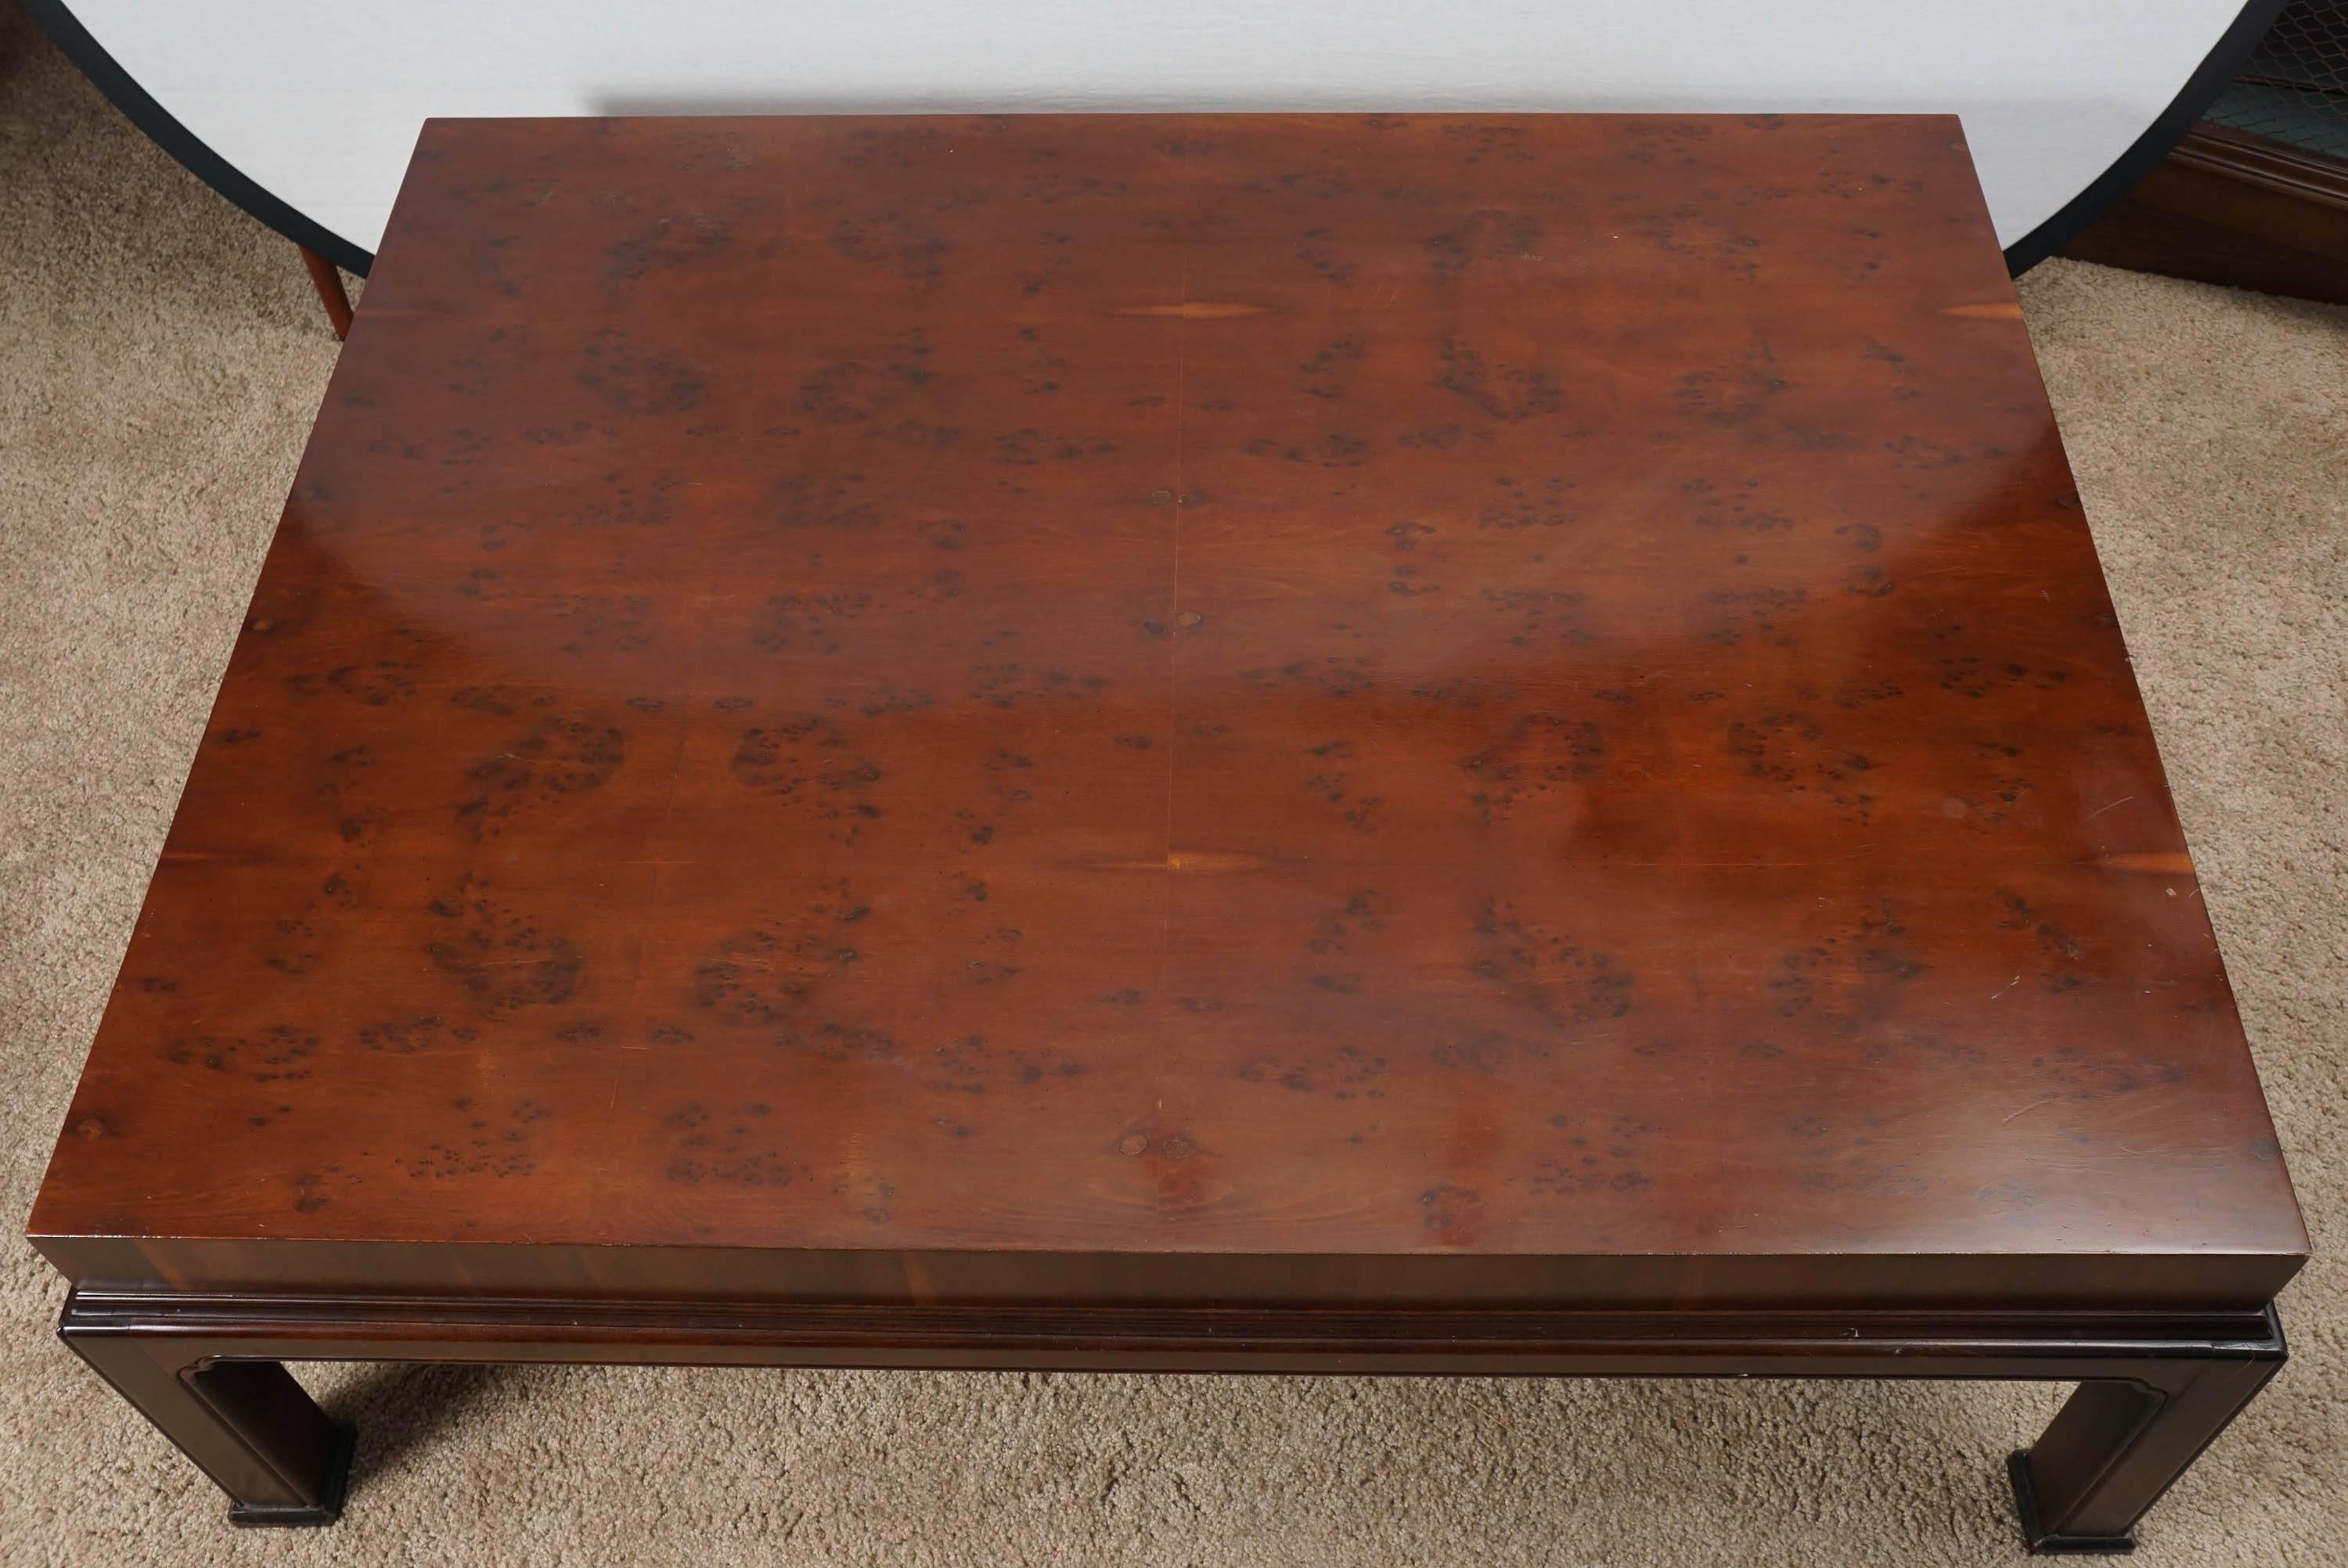 Large Burled Wood Coffee Table by Henredon, Mid-20th Century In Excellent Condition For Sale In Sheffield, MA